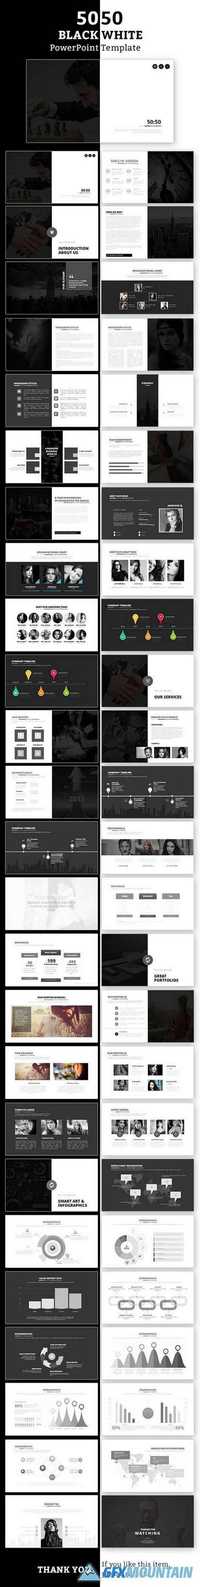 Graphicriver 50:50 PowerPoint Template 12948281